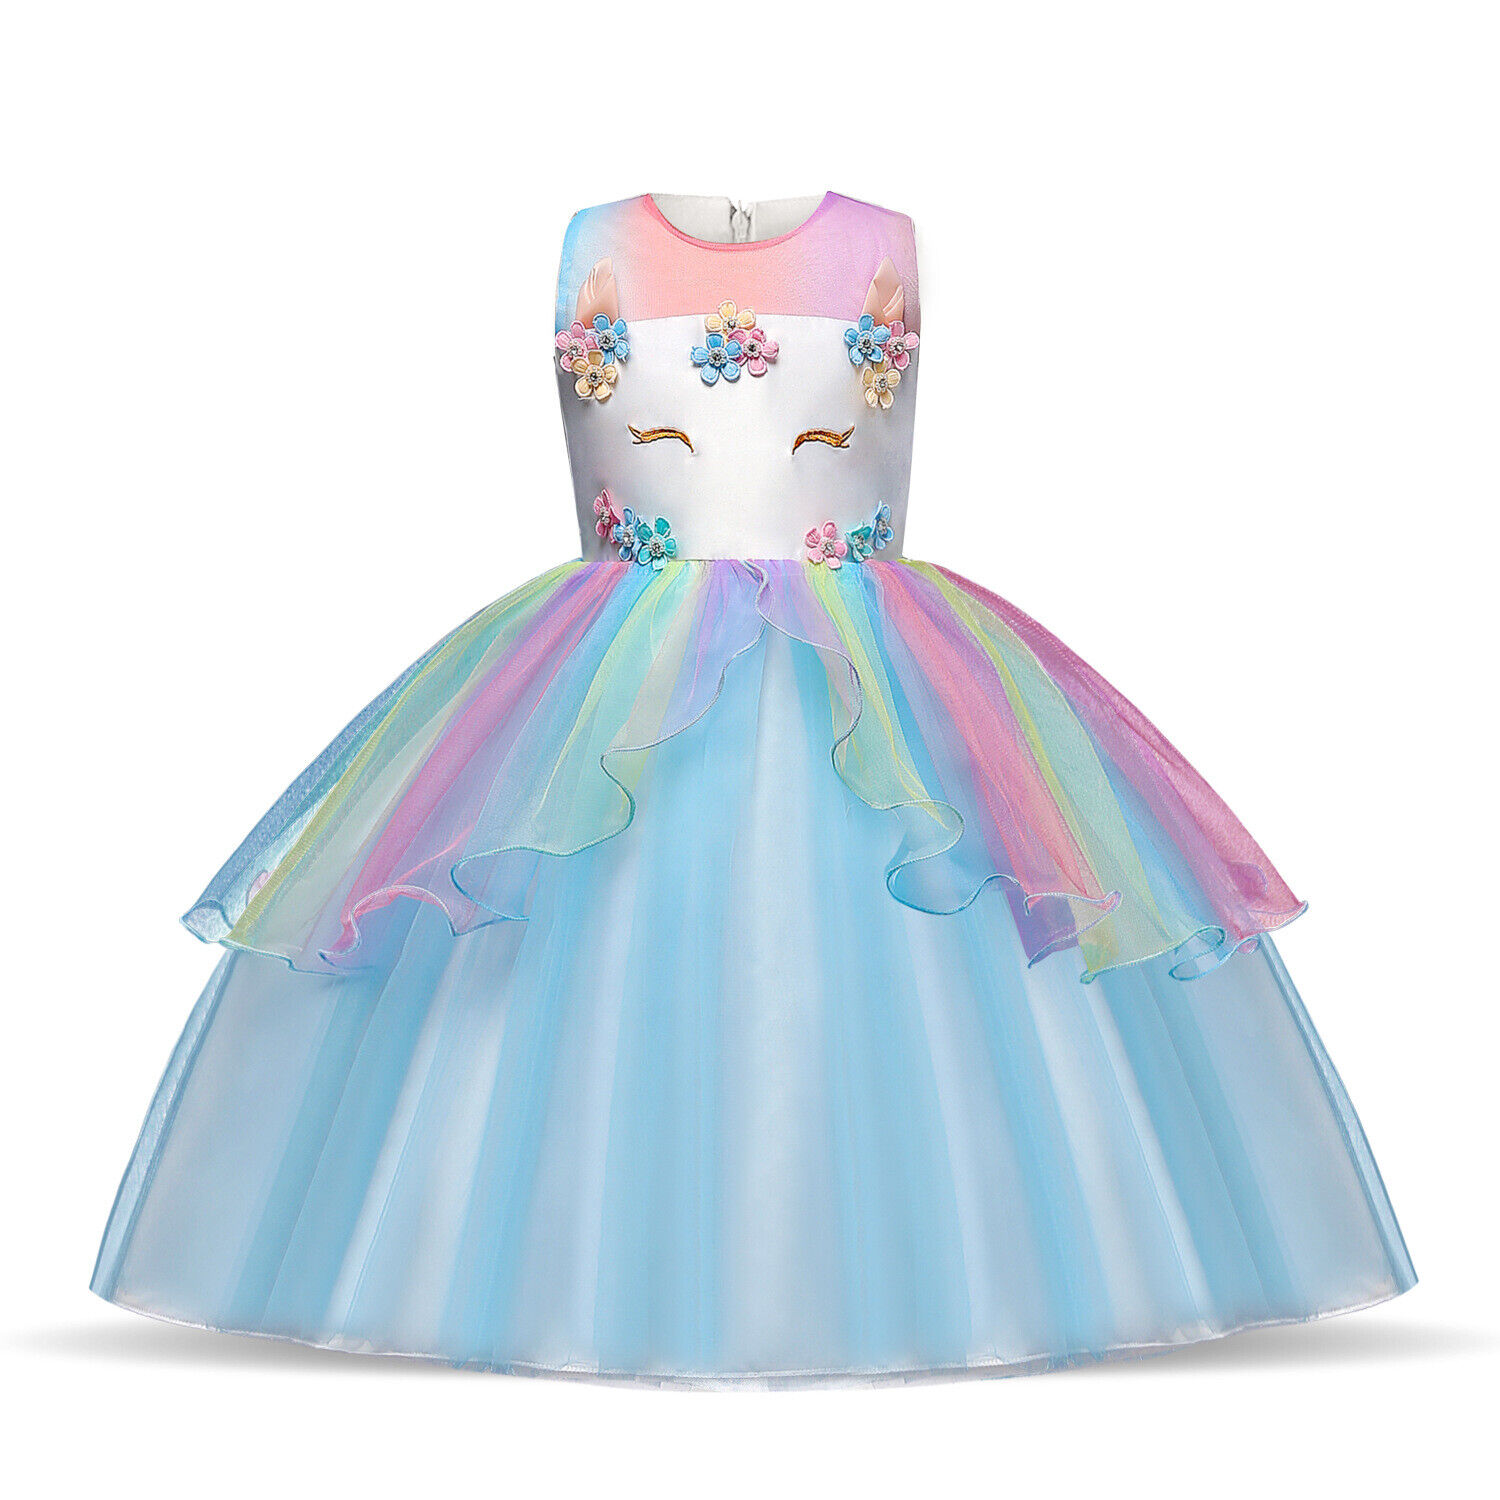 Unicorn Toddler Kids Girls Dress Birthday Sequins Dress Outfits Party ...